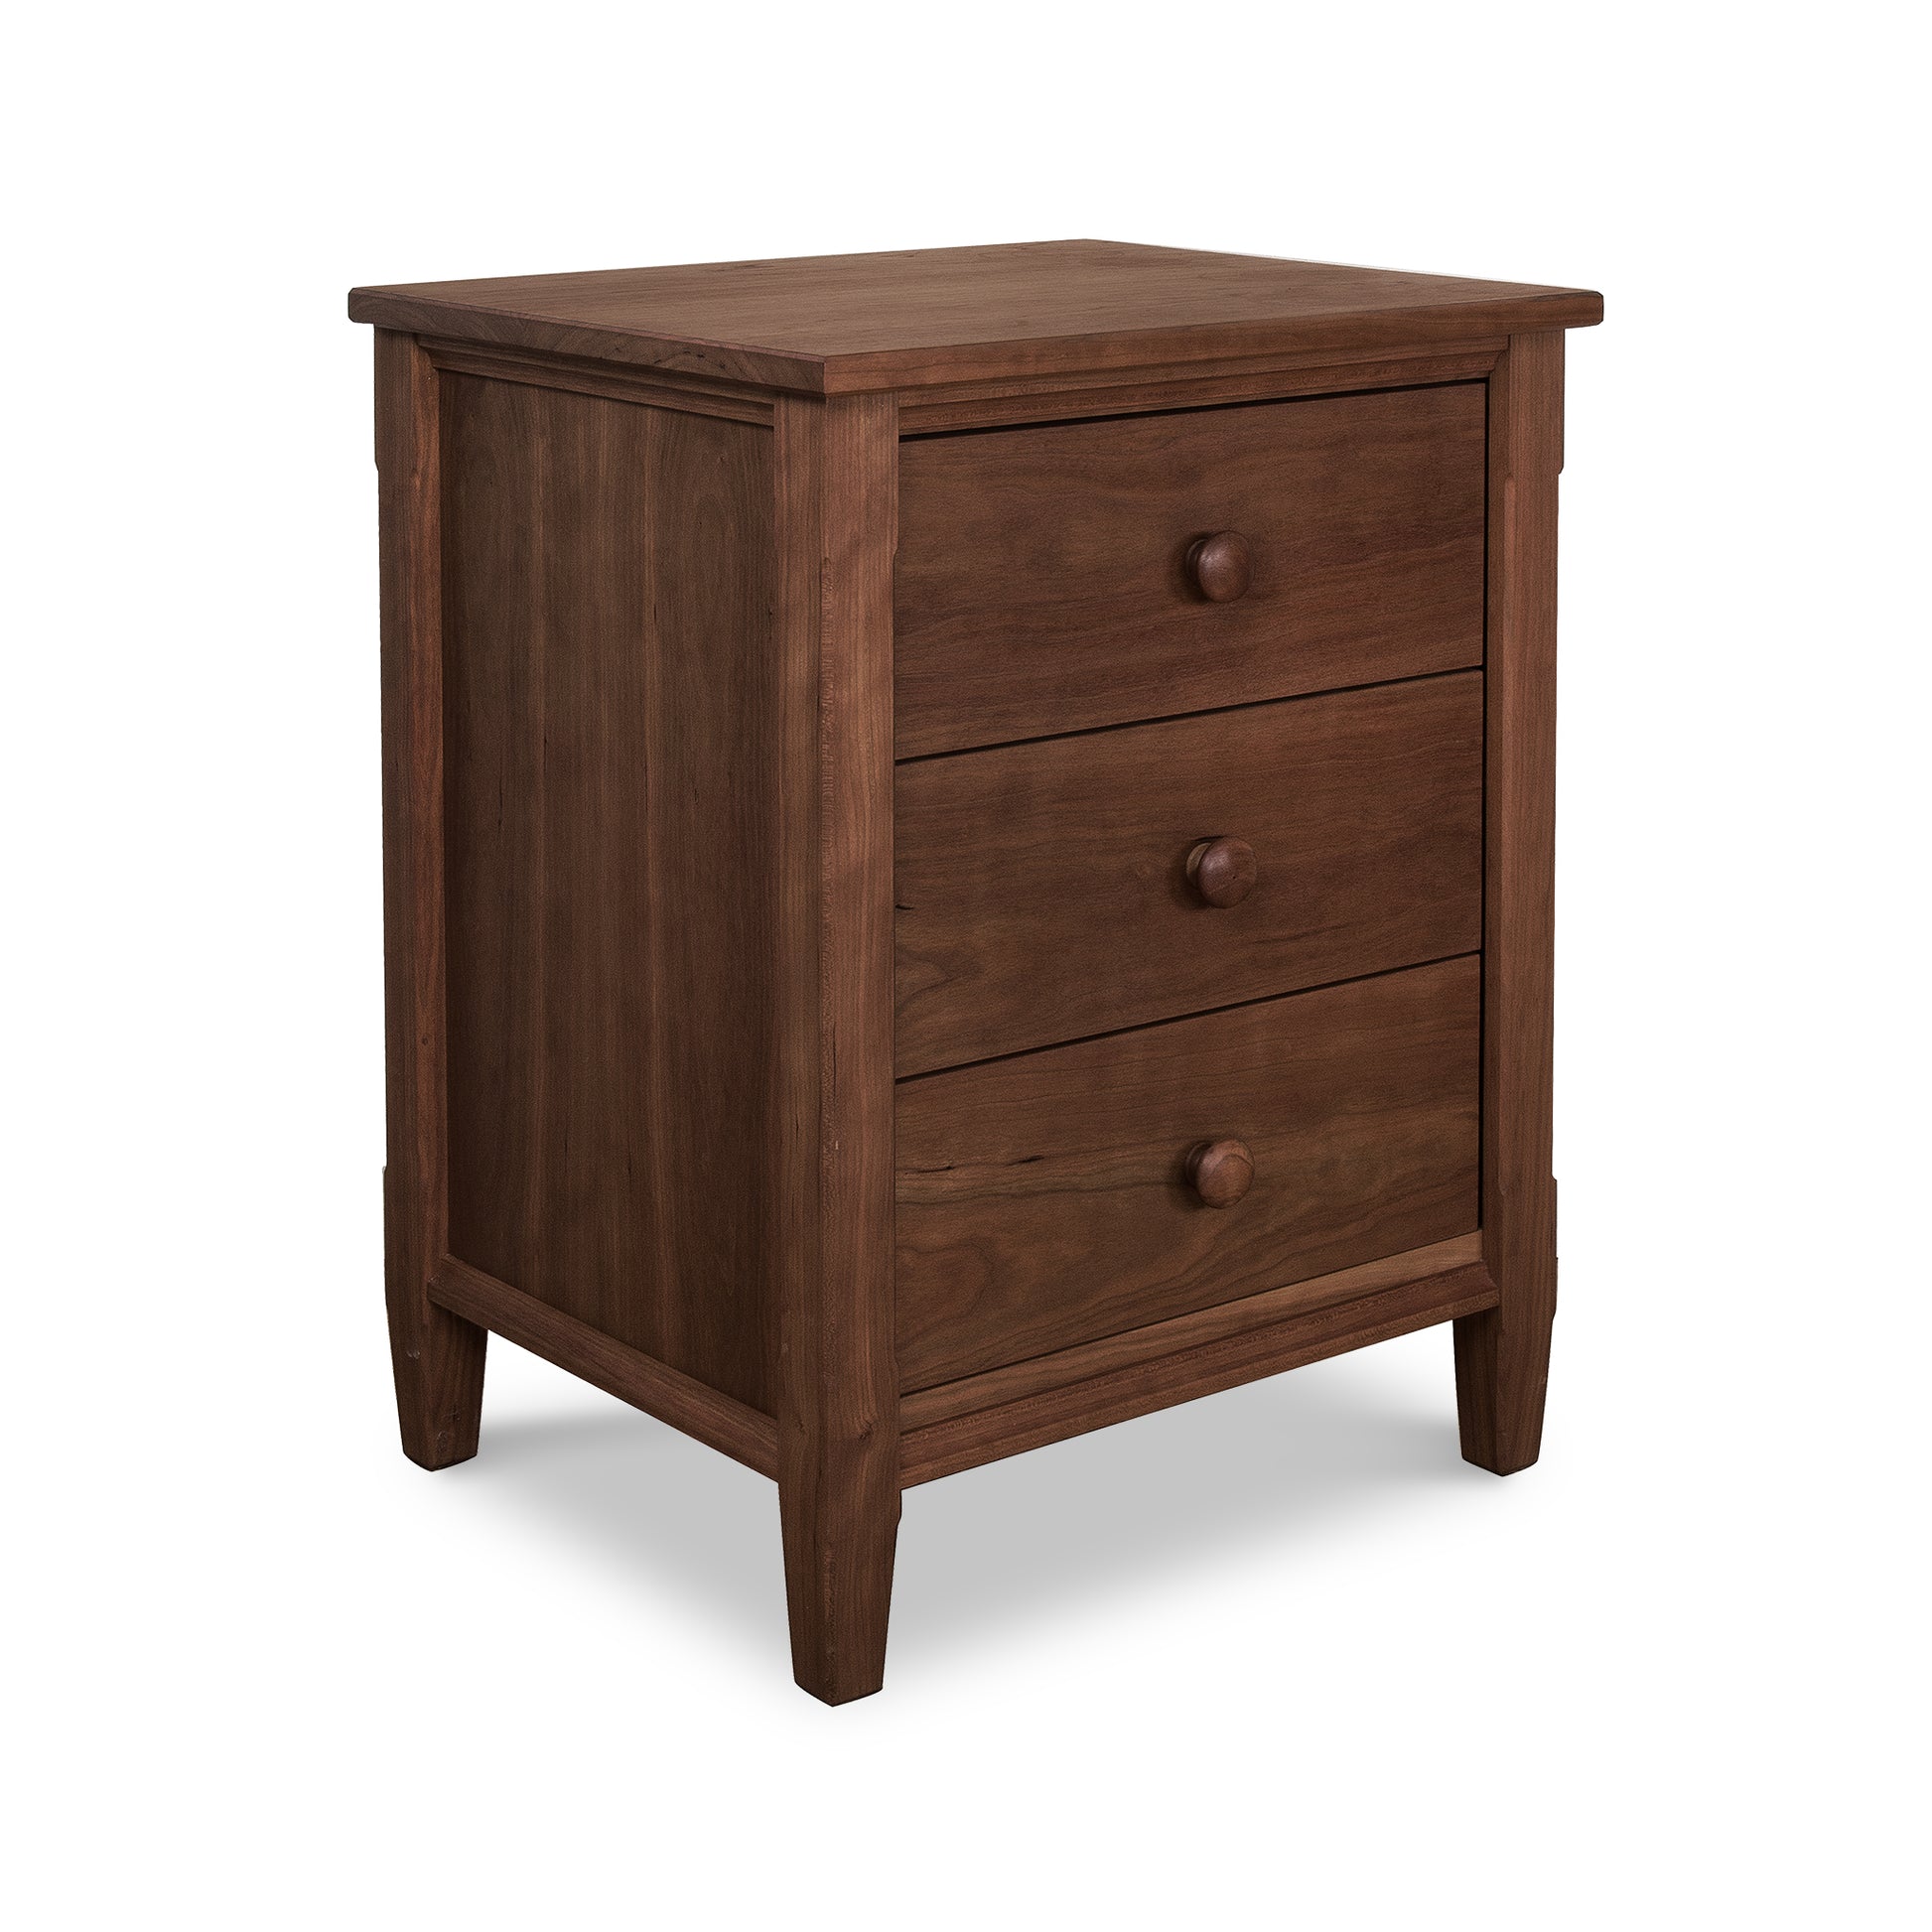 A Maple Corner Woodworks Vermont Shaker 3-Drawer Nightstand, crafted from eco-friendly natural hardwoods, features three drawers with round knobs and is isolated on a white background. This table has a simple, traditional design with a flat